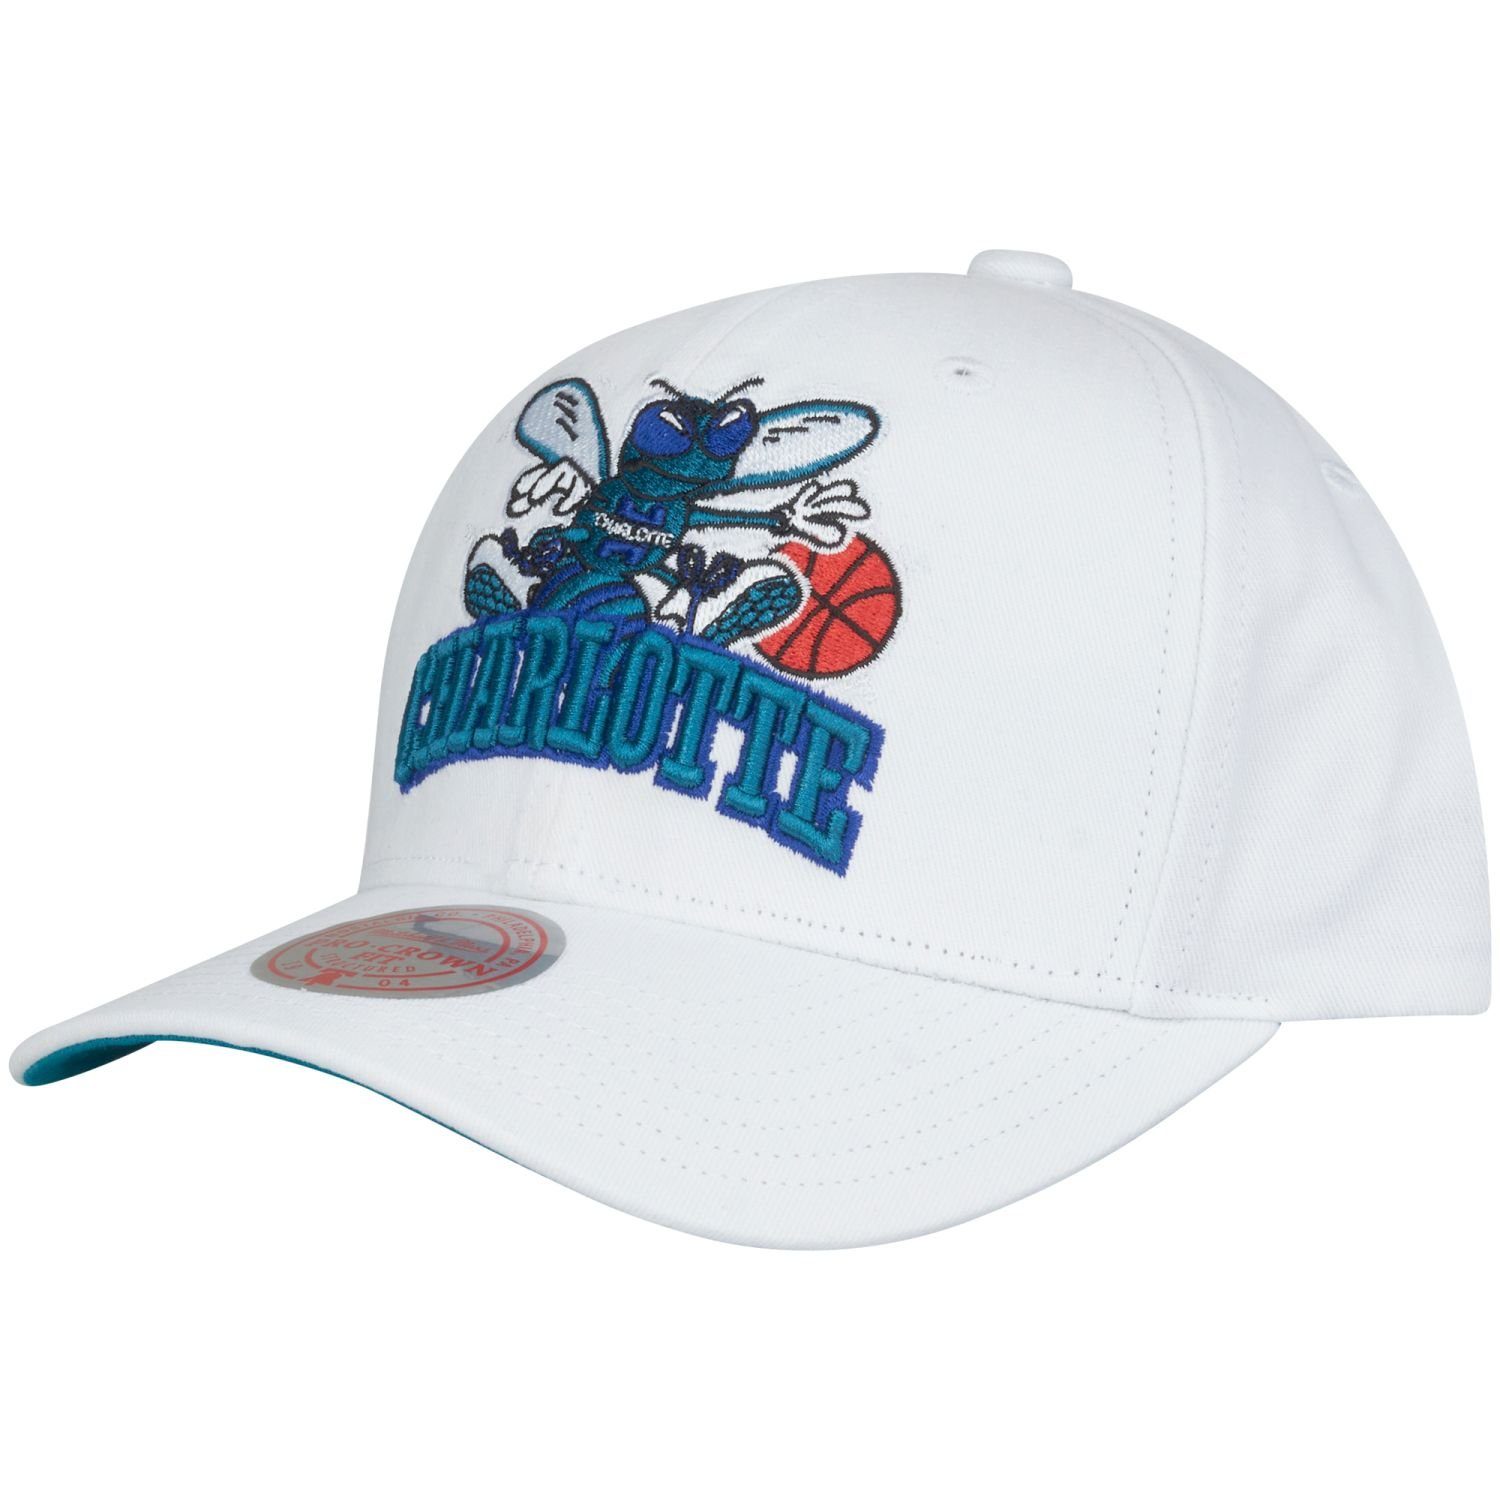 Mitchell & Ness Snapback Cap ALL IN PRO Charlotte Hornets